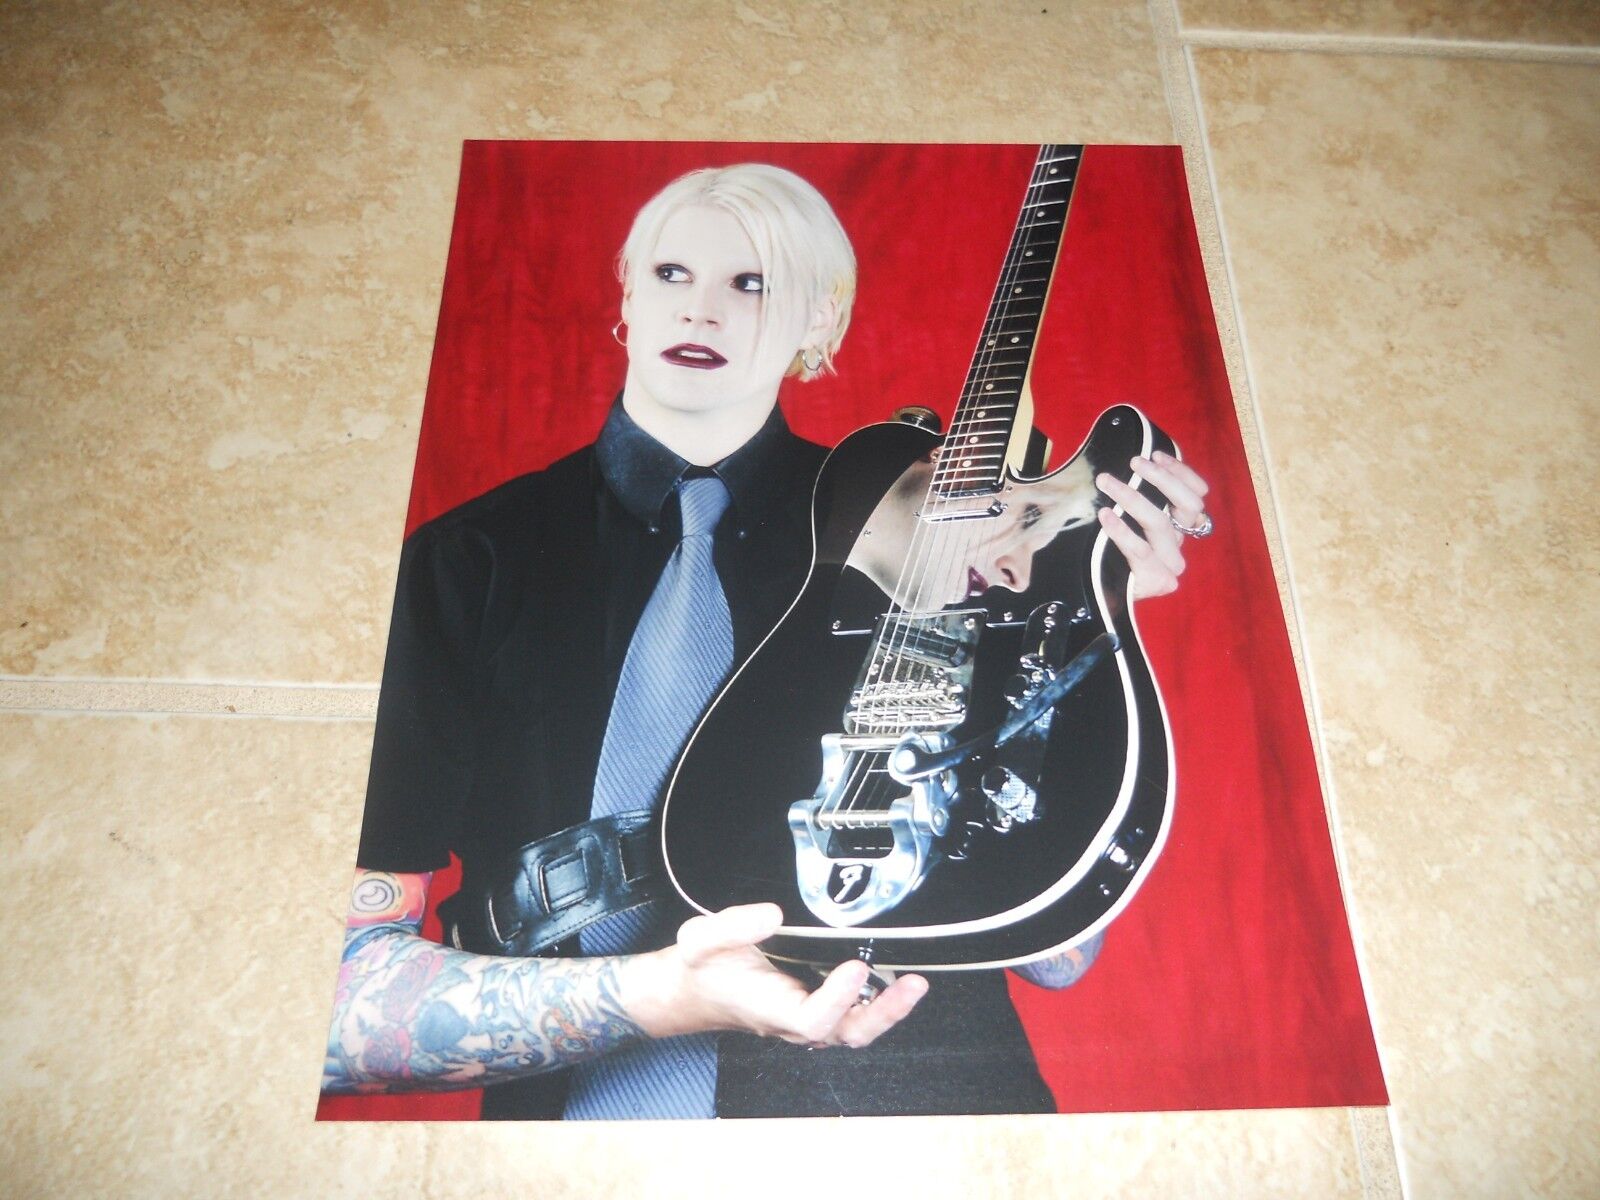 John 5 Five Marilyn Manson Promo 8x10 Color Photo Poster painting CD #3